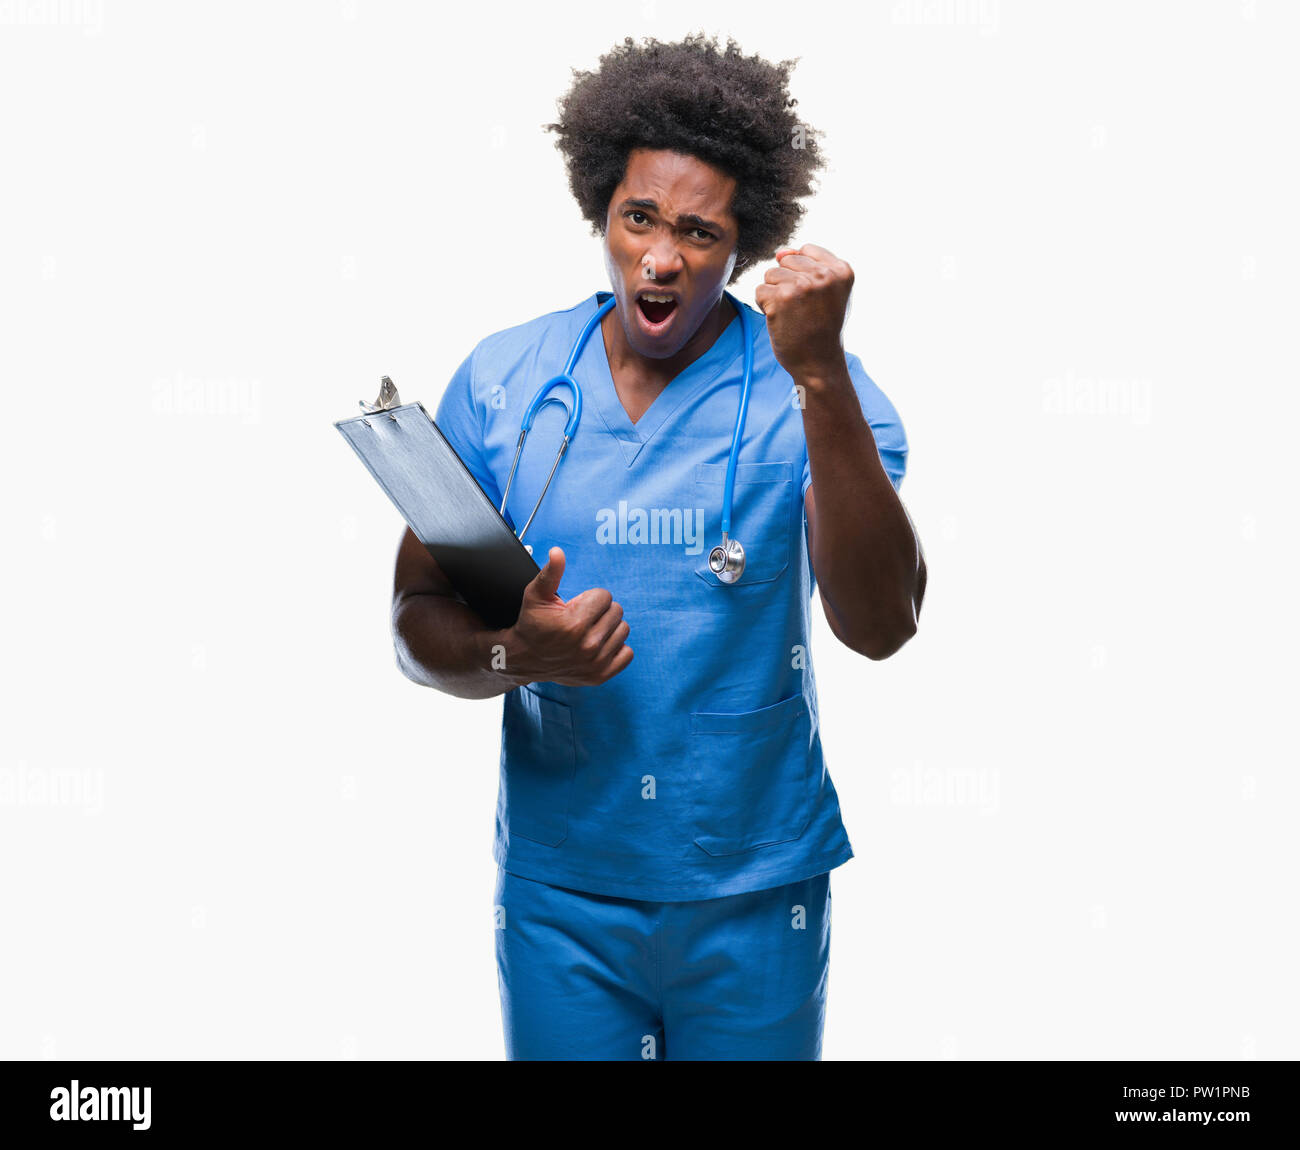 Afro american surgeon doctor holding clipboard man over isolated background annoyed and frustrated shouting with anger, crazy and yelling with raised  Stock Photo